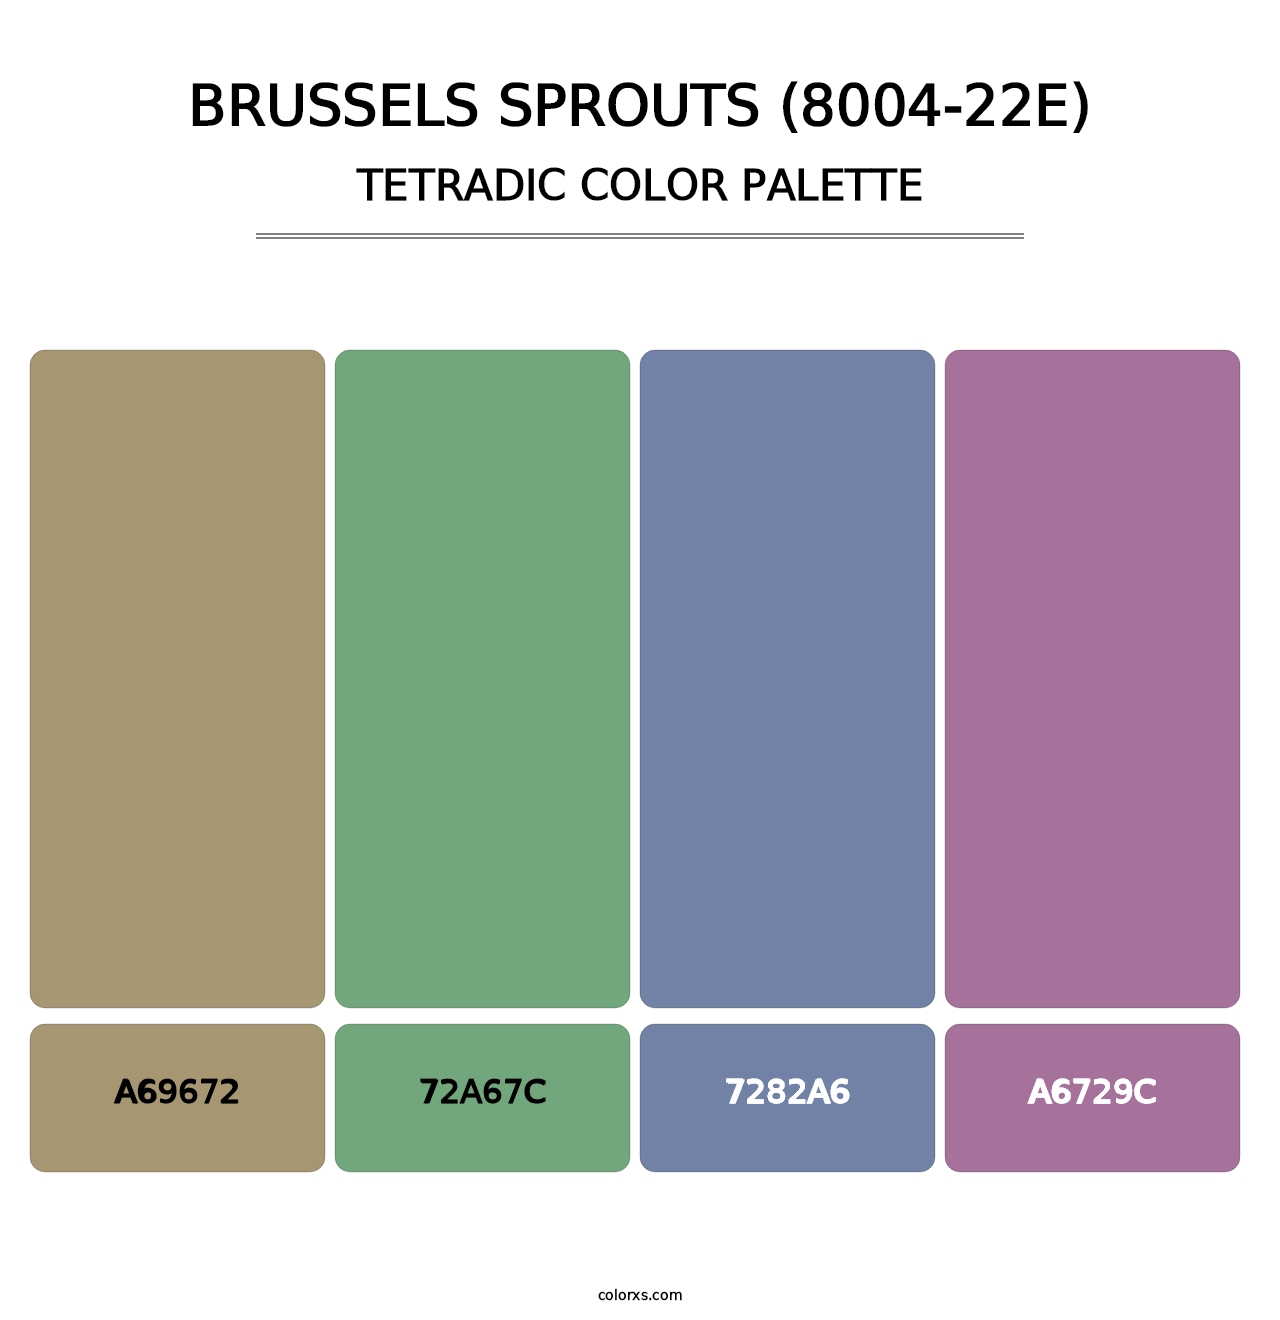 Brussels Sprouts (8004-22E) - Tetradic Color Palette